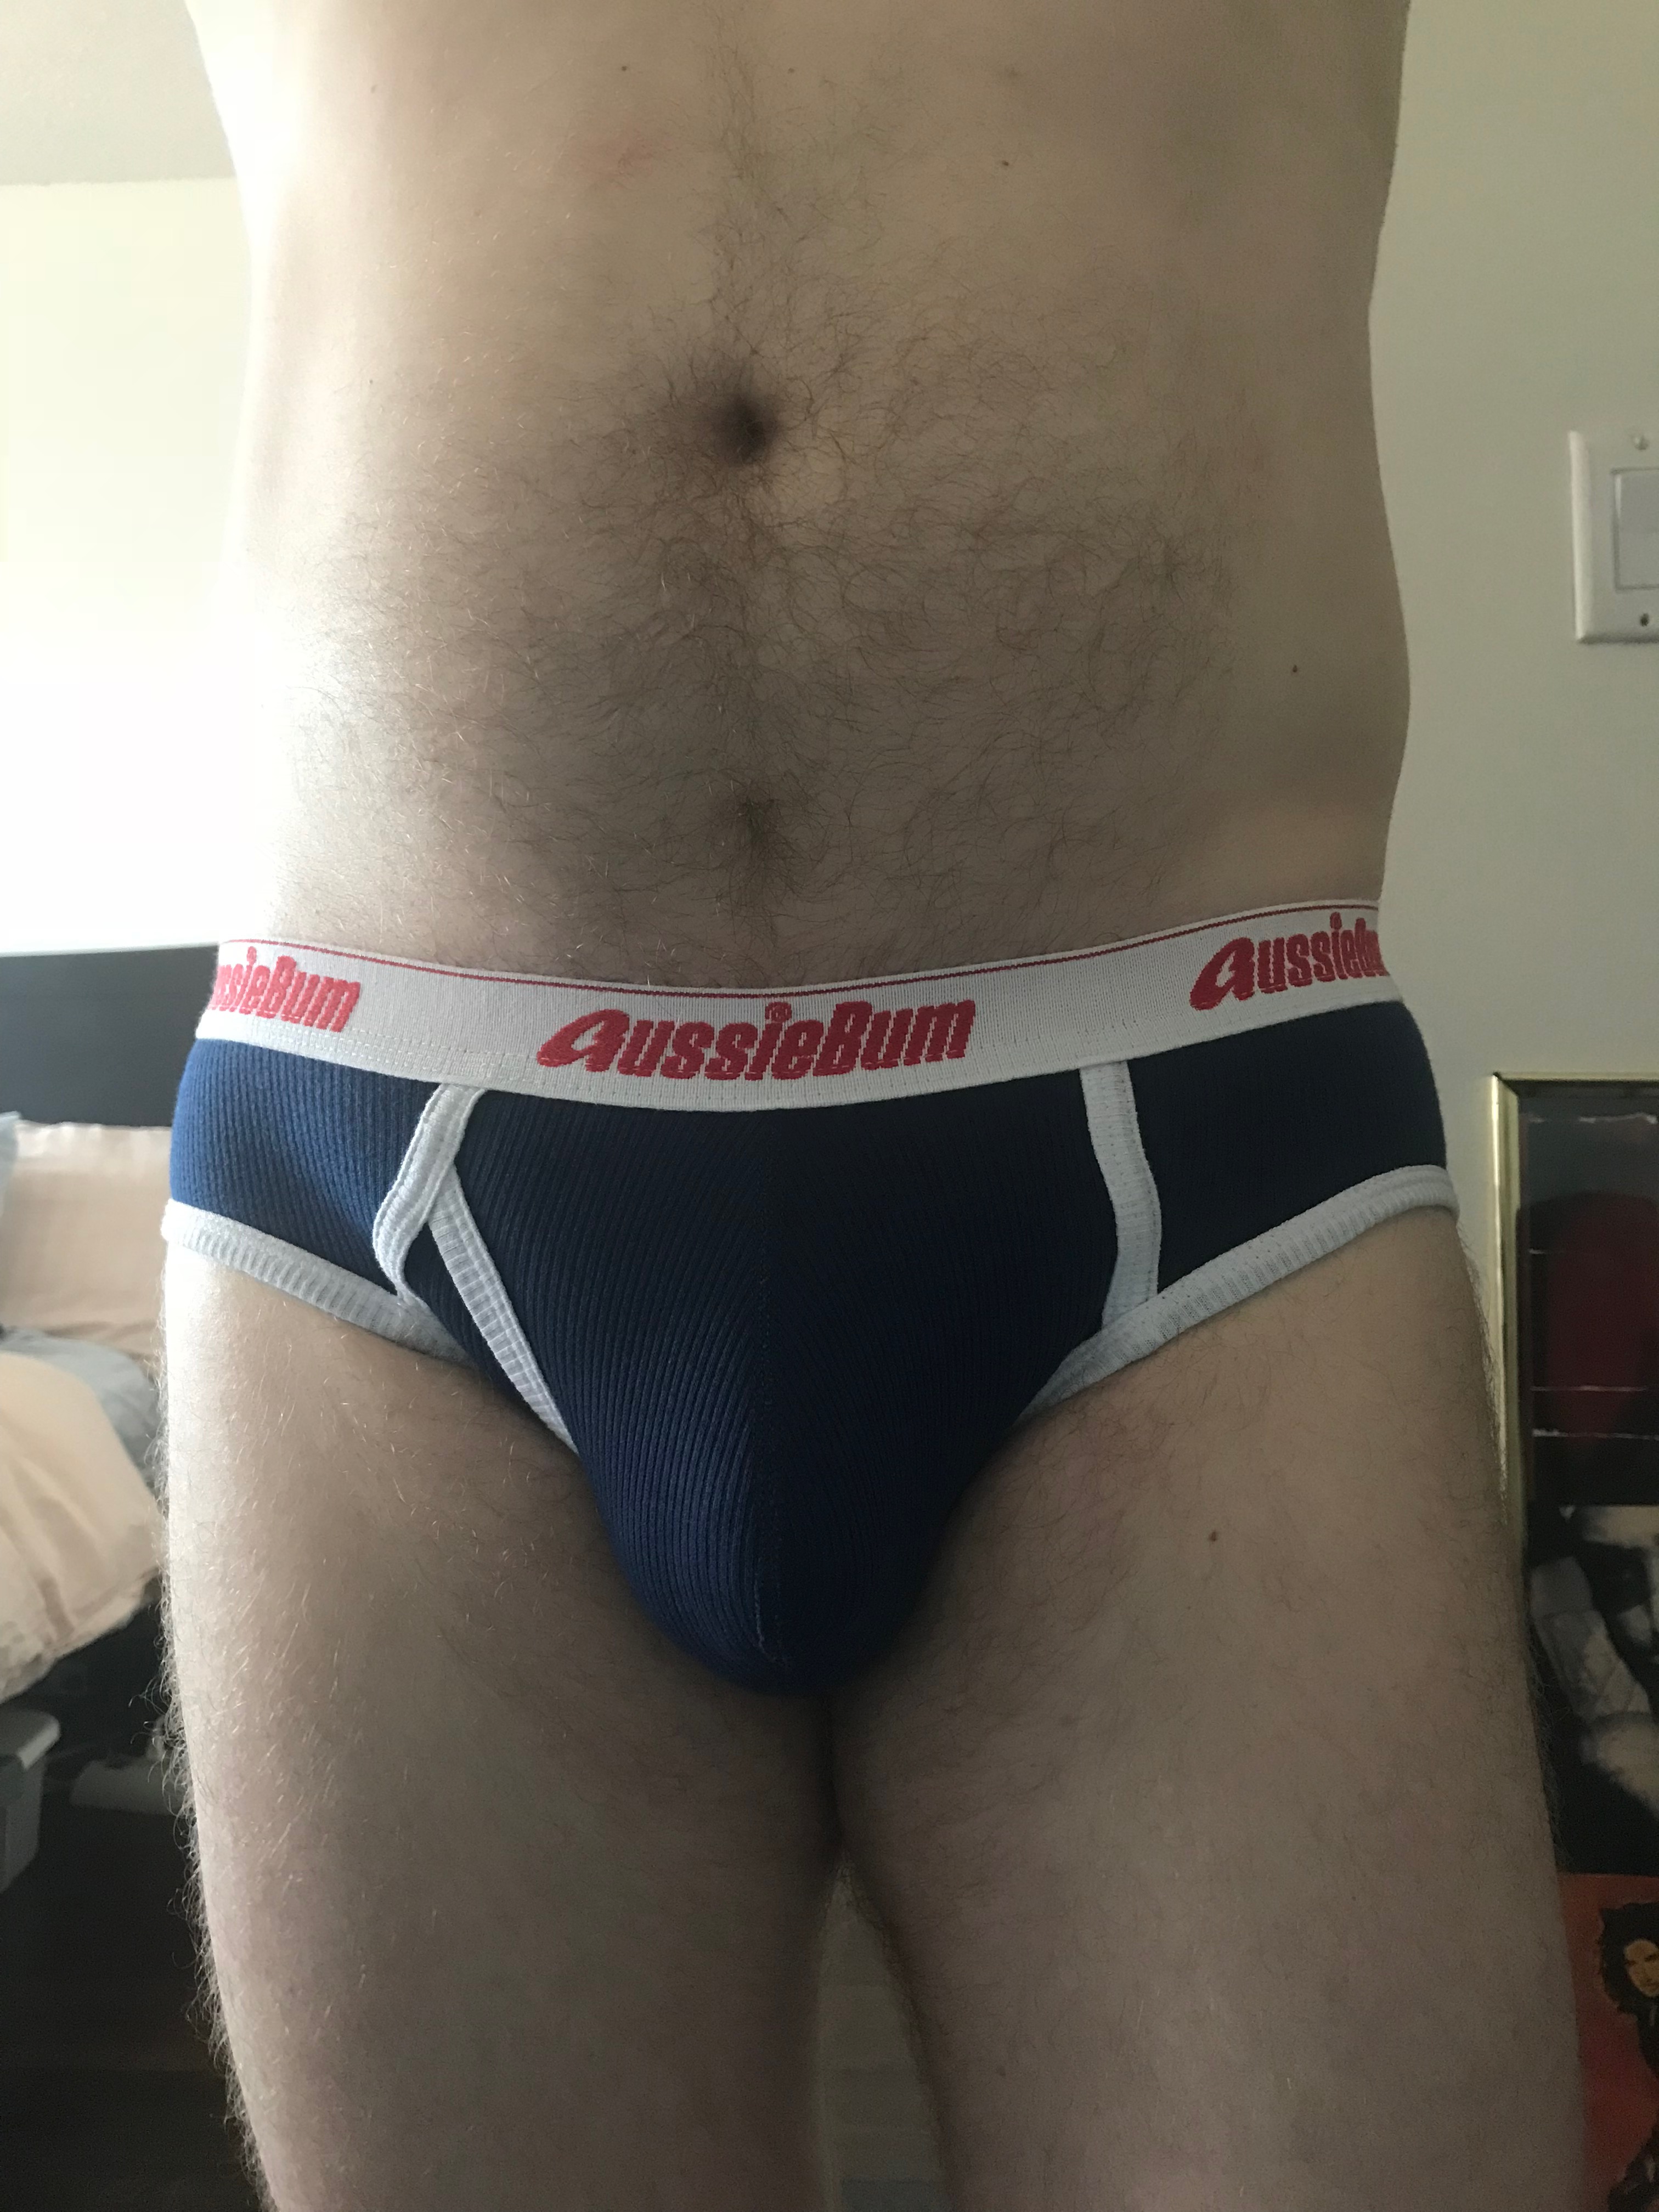 Slogans can make or break a brand…but AussieBum gets it right…